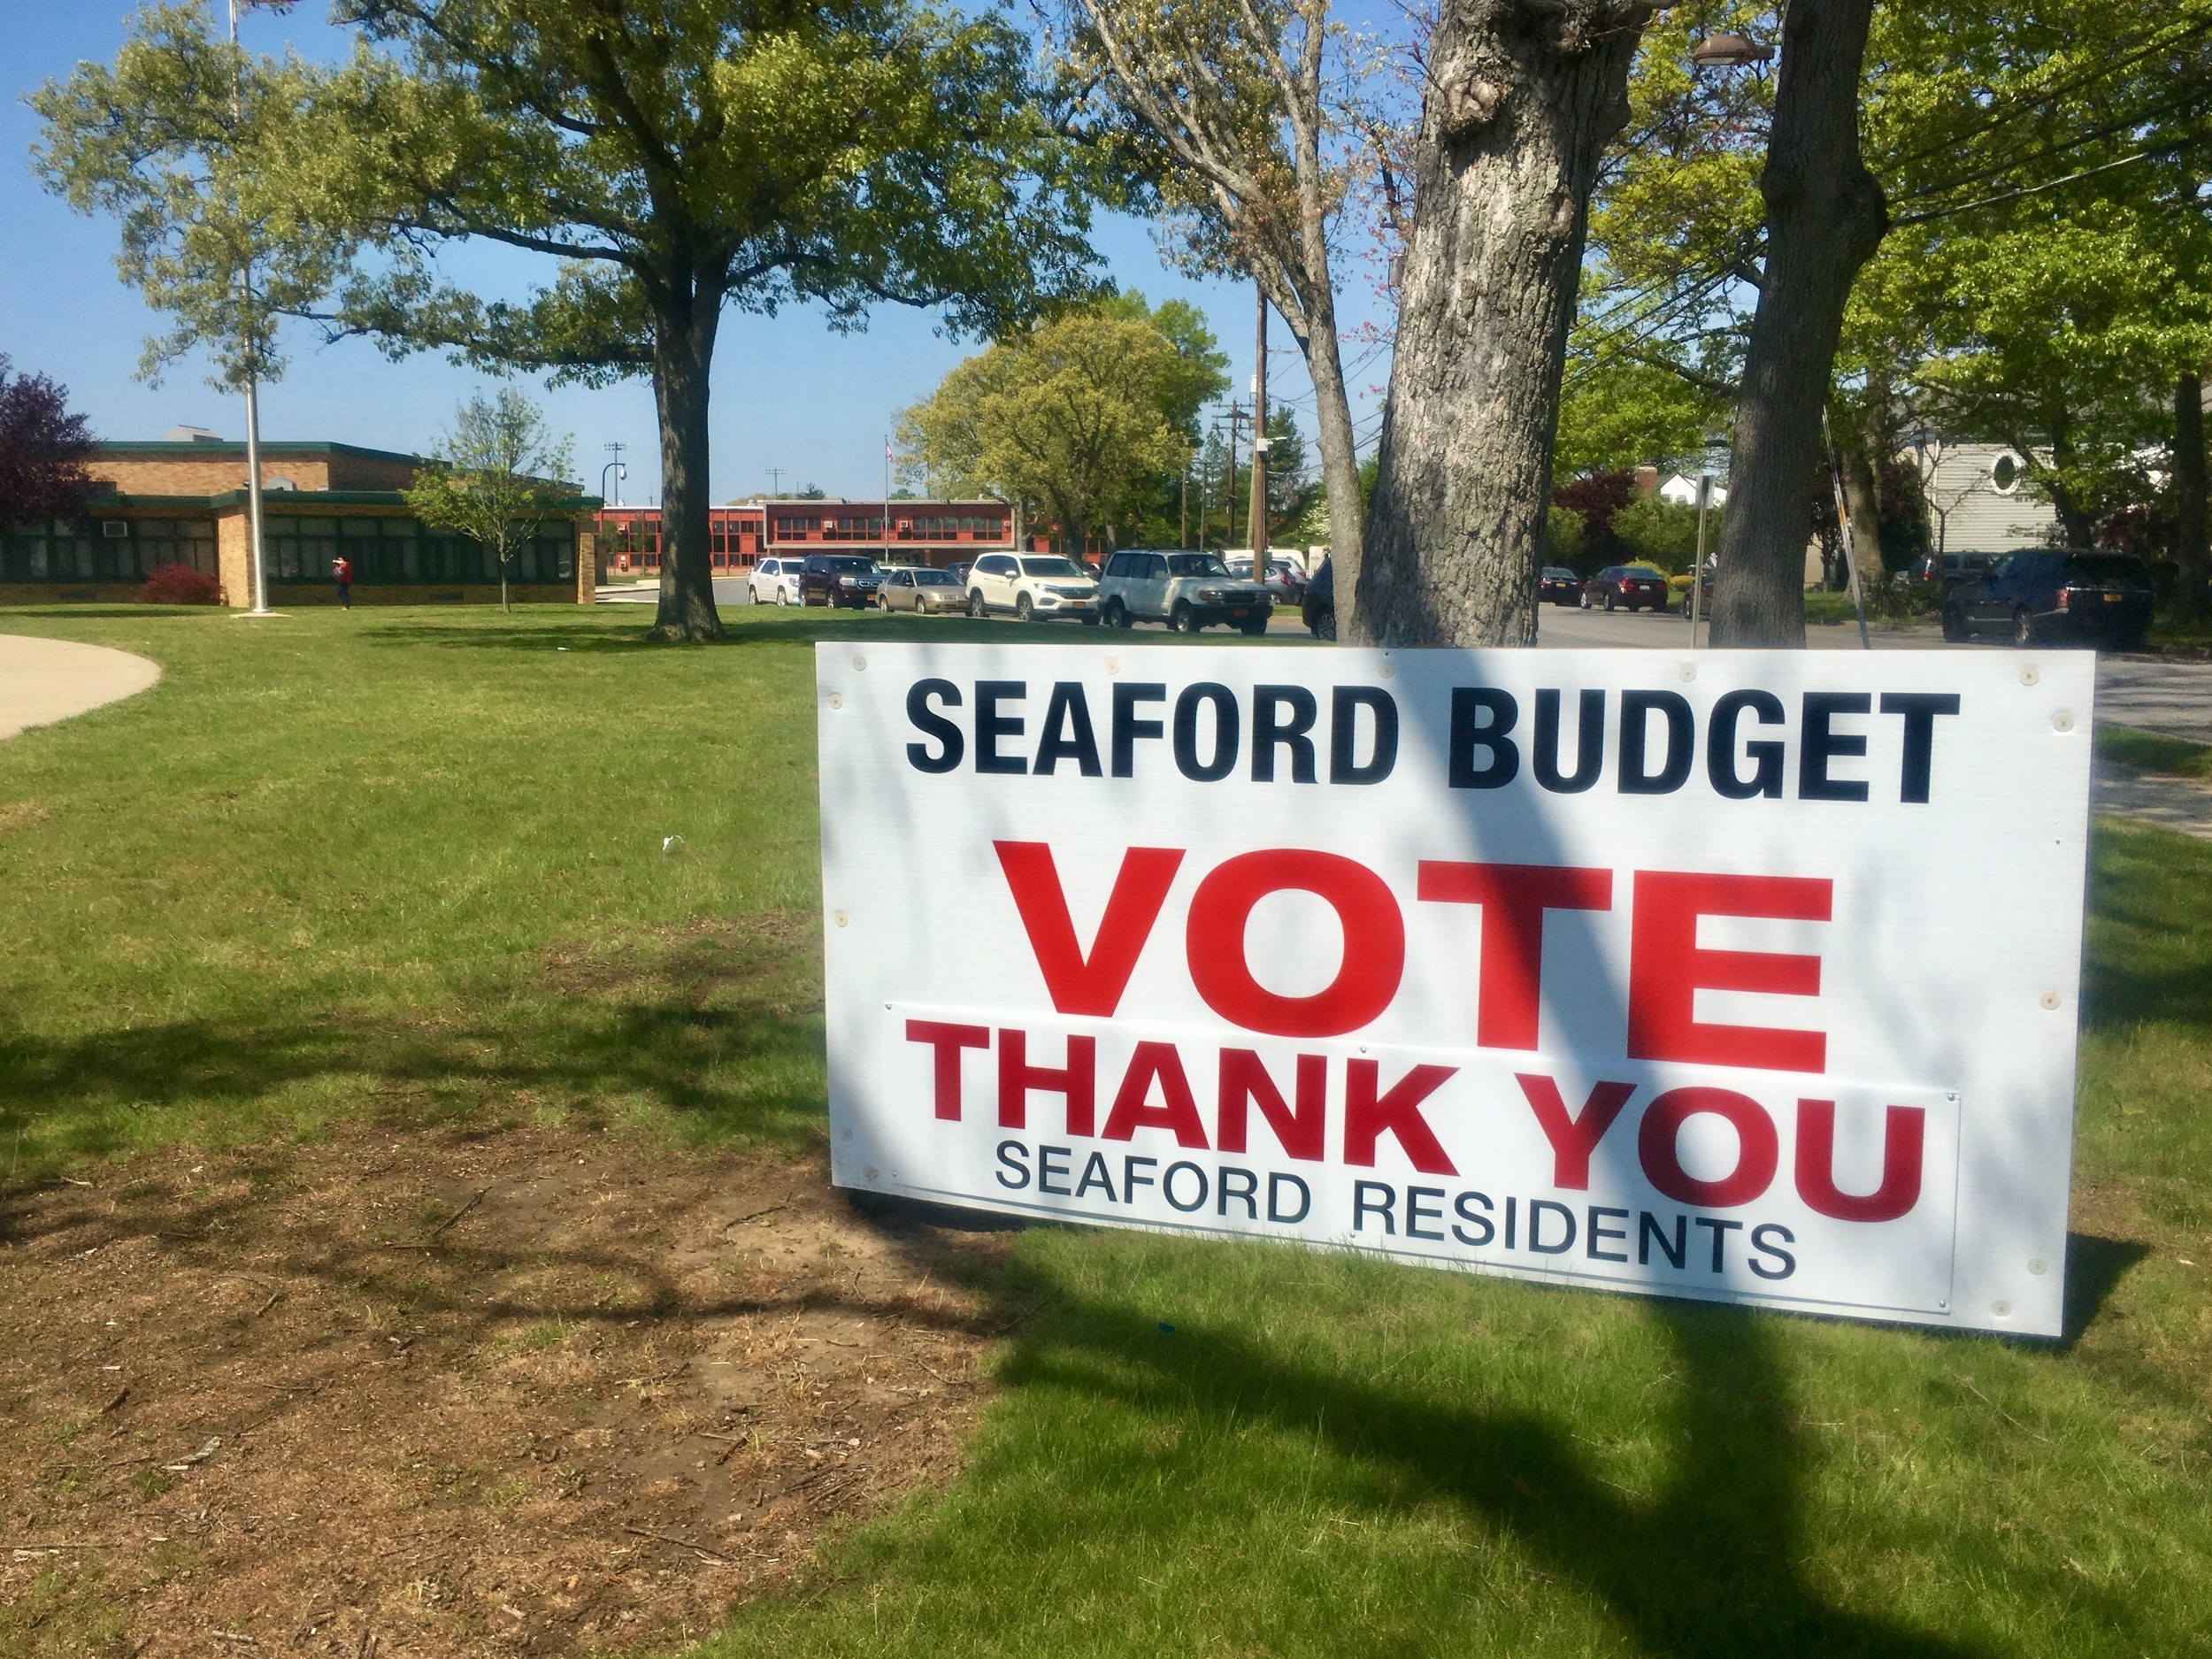 Seaford officials said that they were grateful to the community for passing the budget.